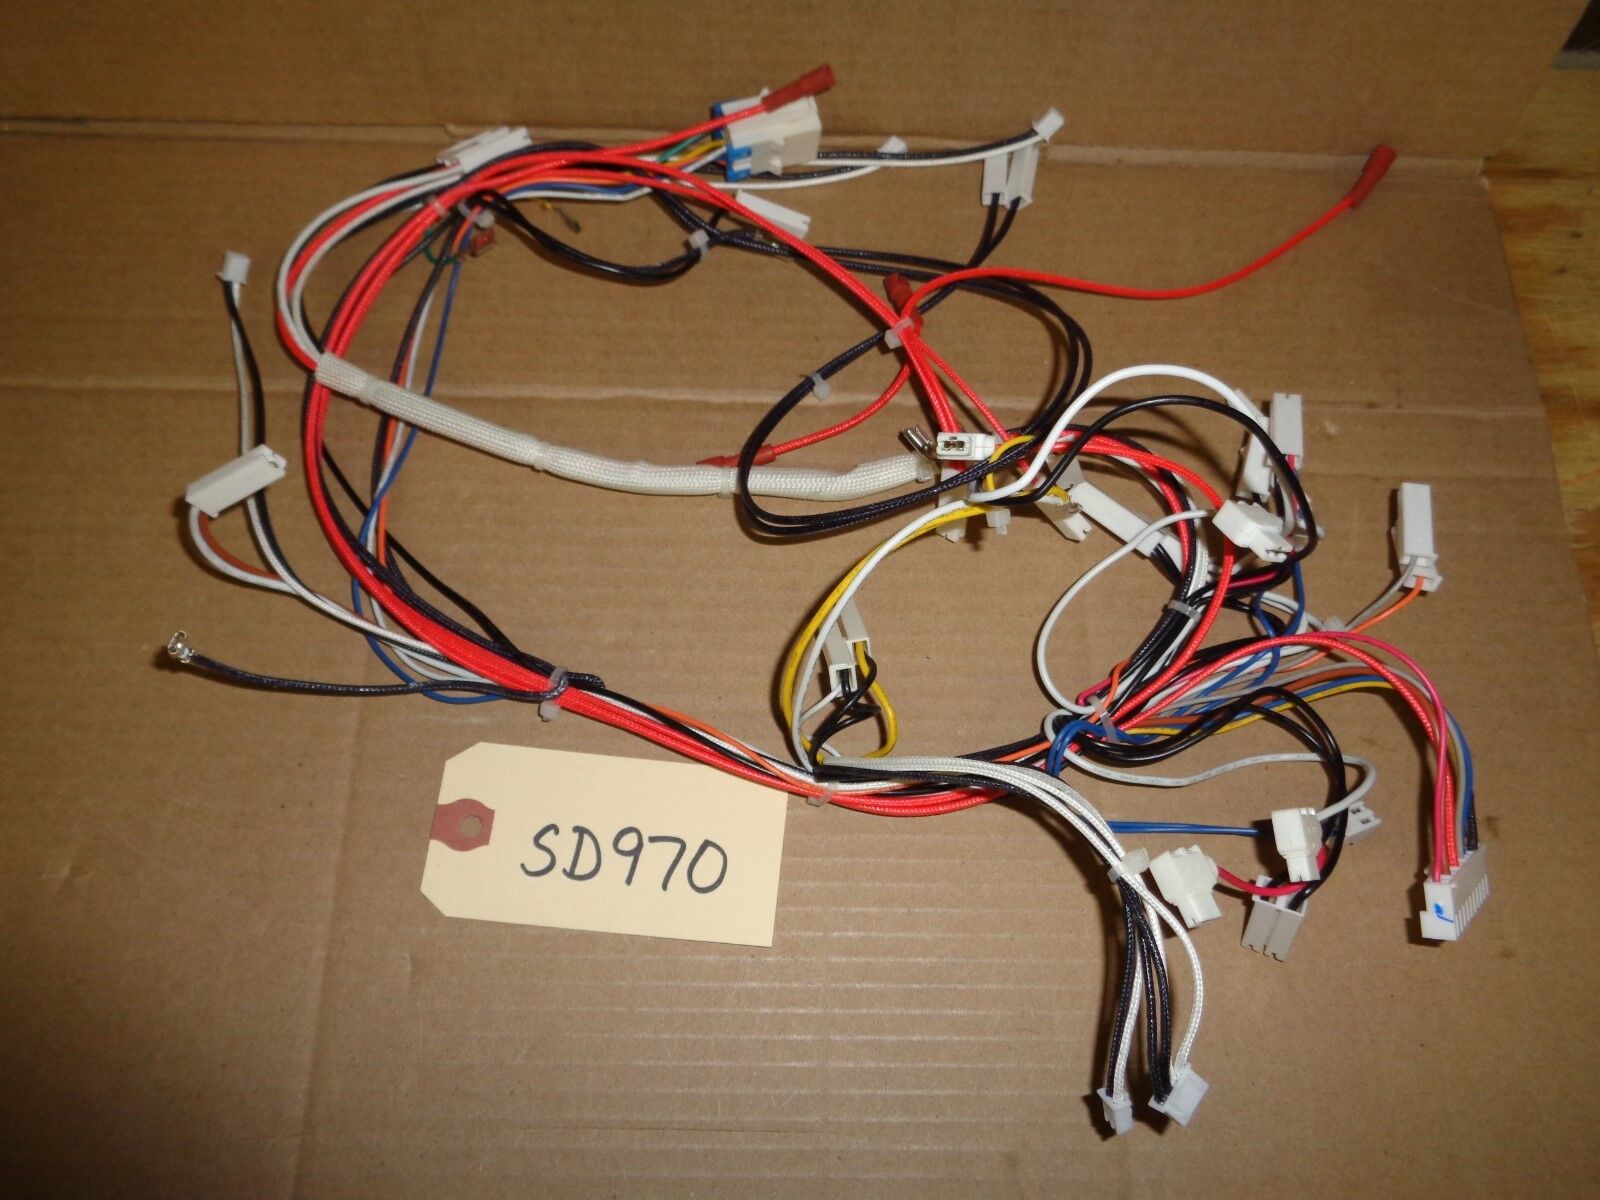 Sales of SALE items Dealing full price reduction from new works GE MICROWAVE WIRING HARNESS FGMV155CTF - SD970